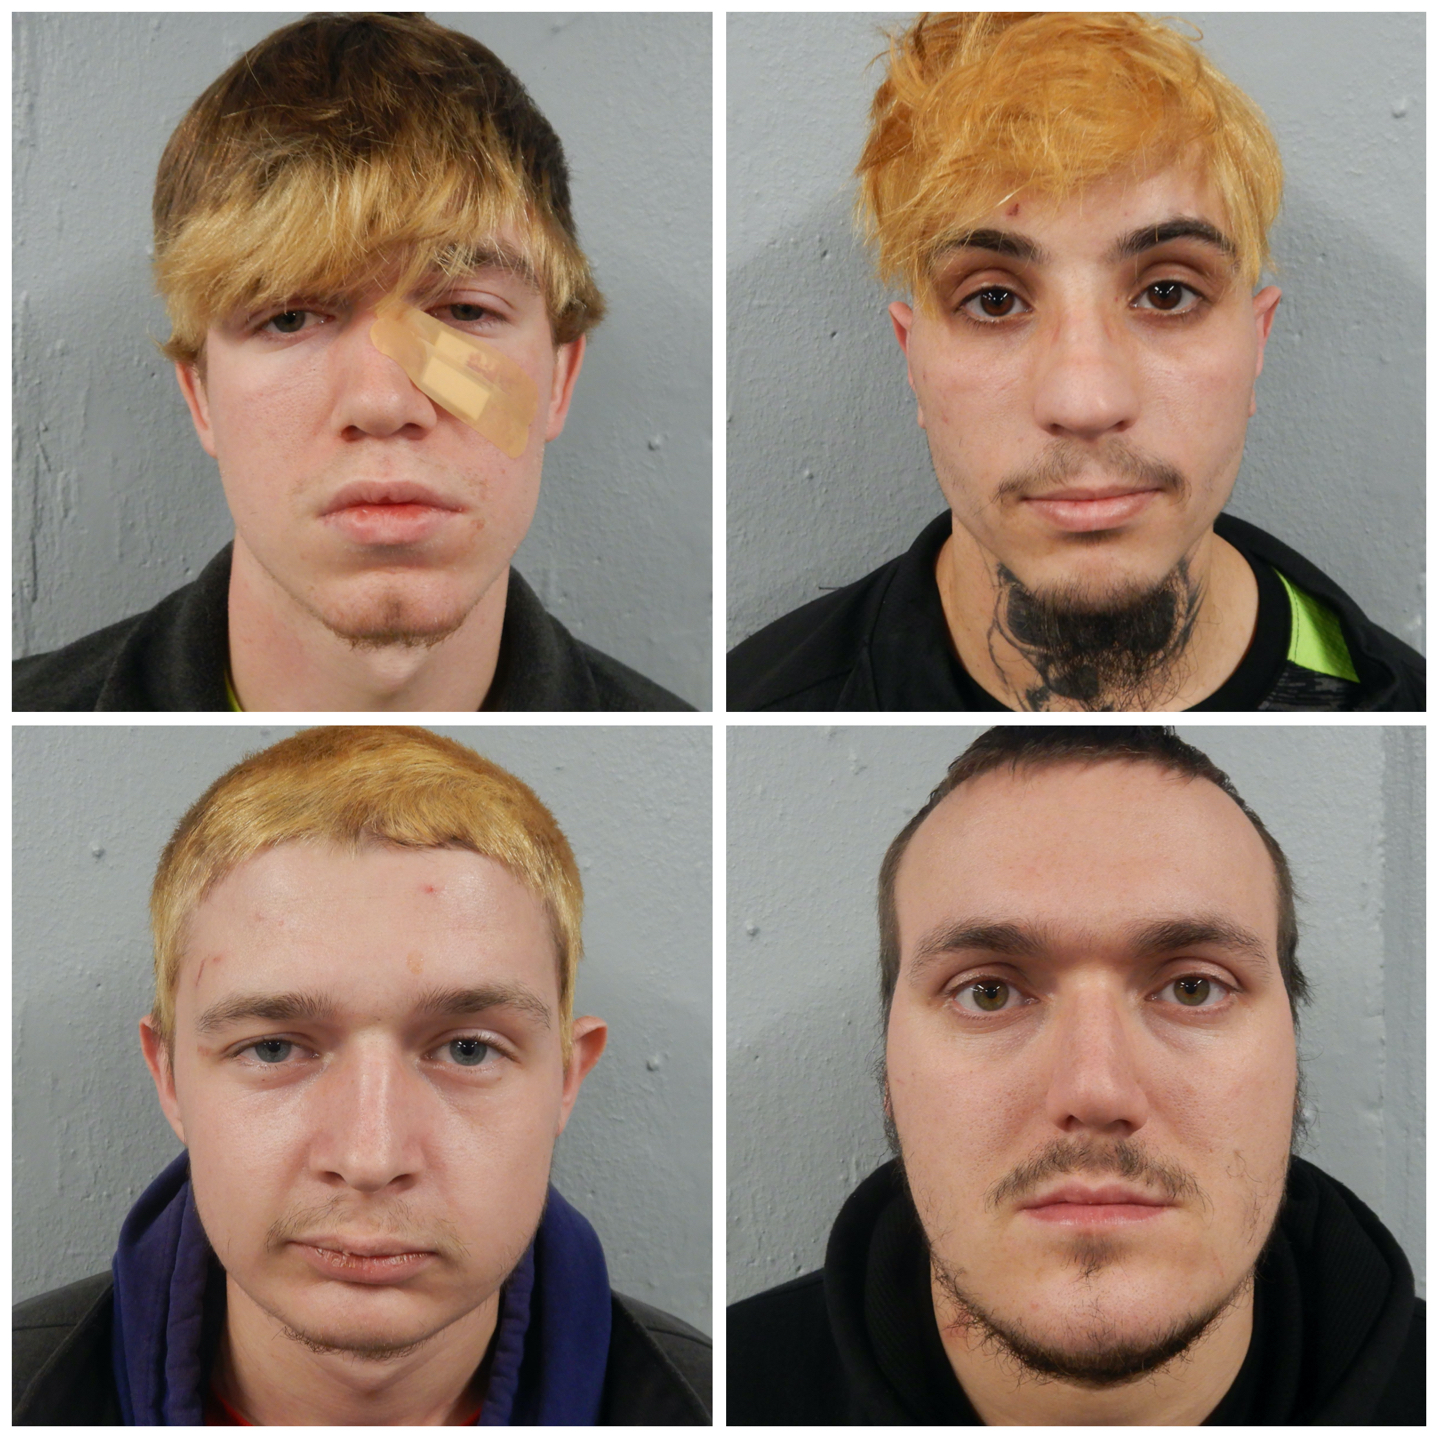 Four arrested in Hannibal